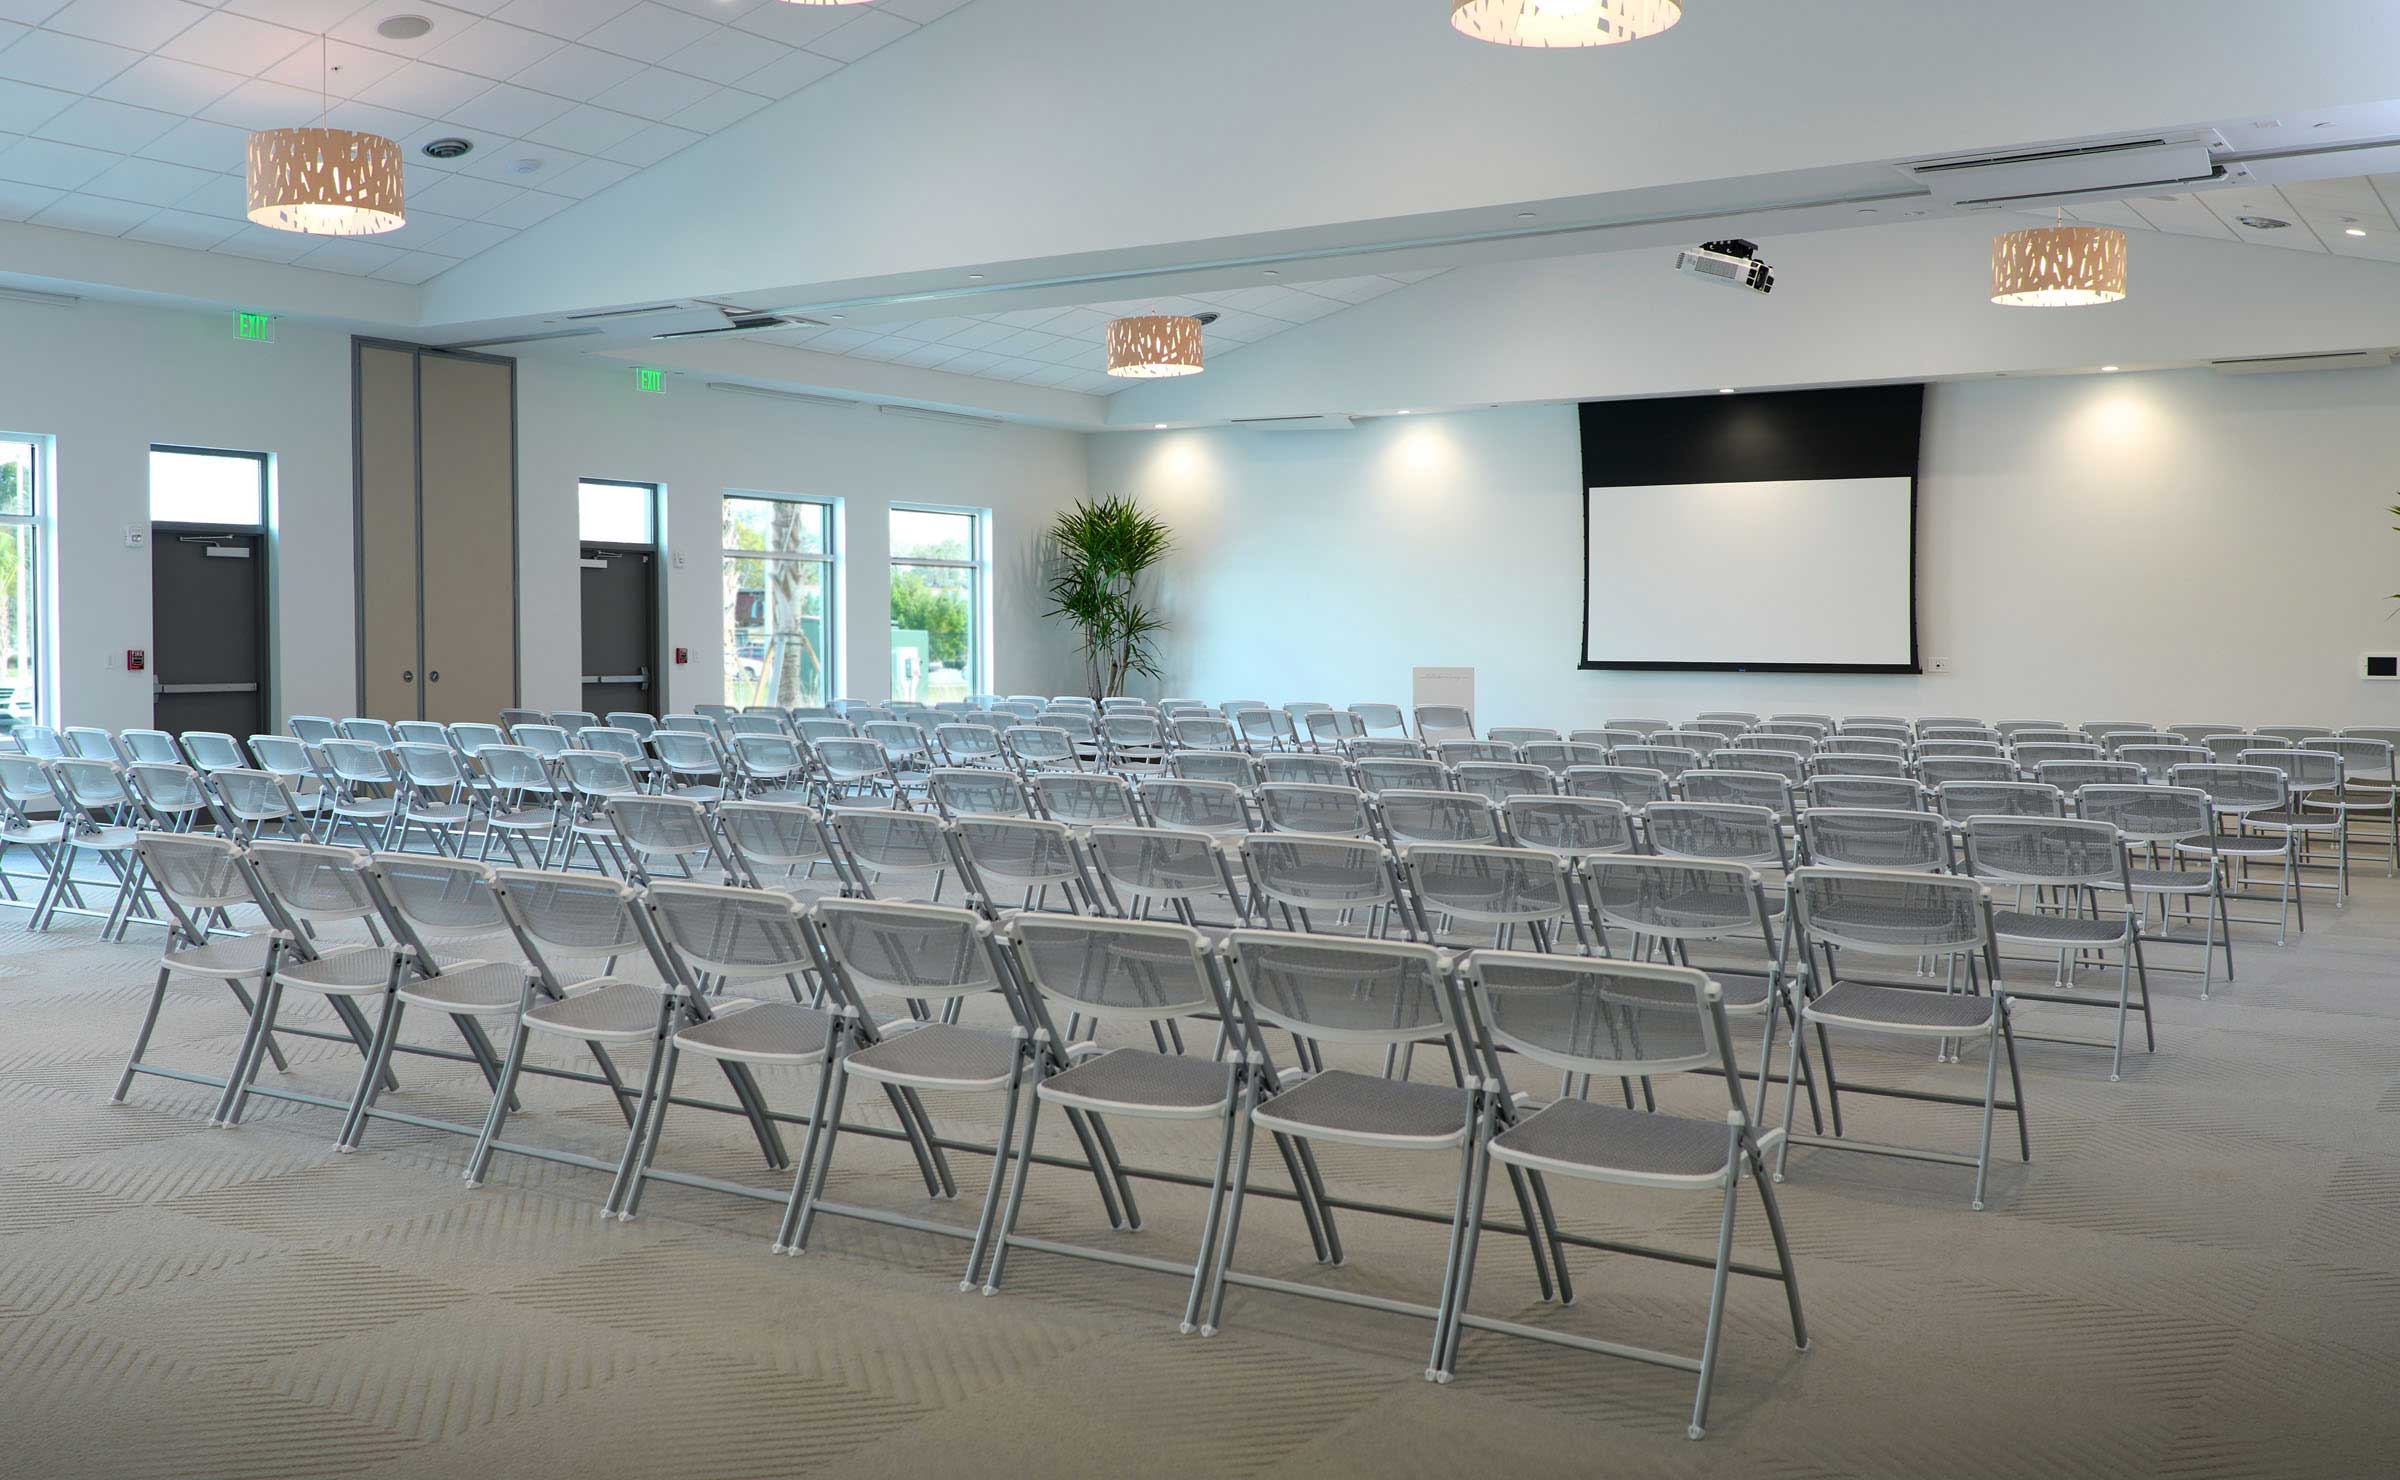 A conference room with rows of chairs and a projection screen.